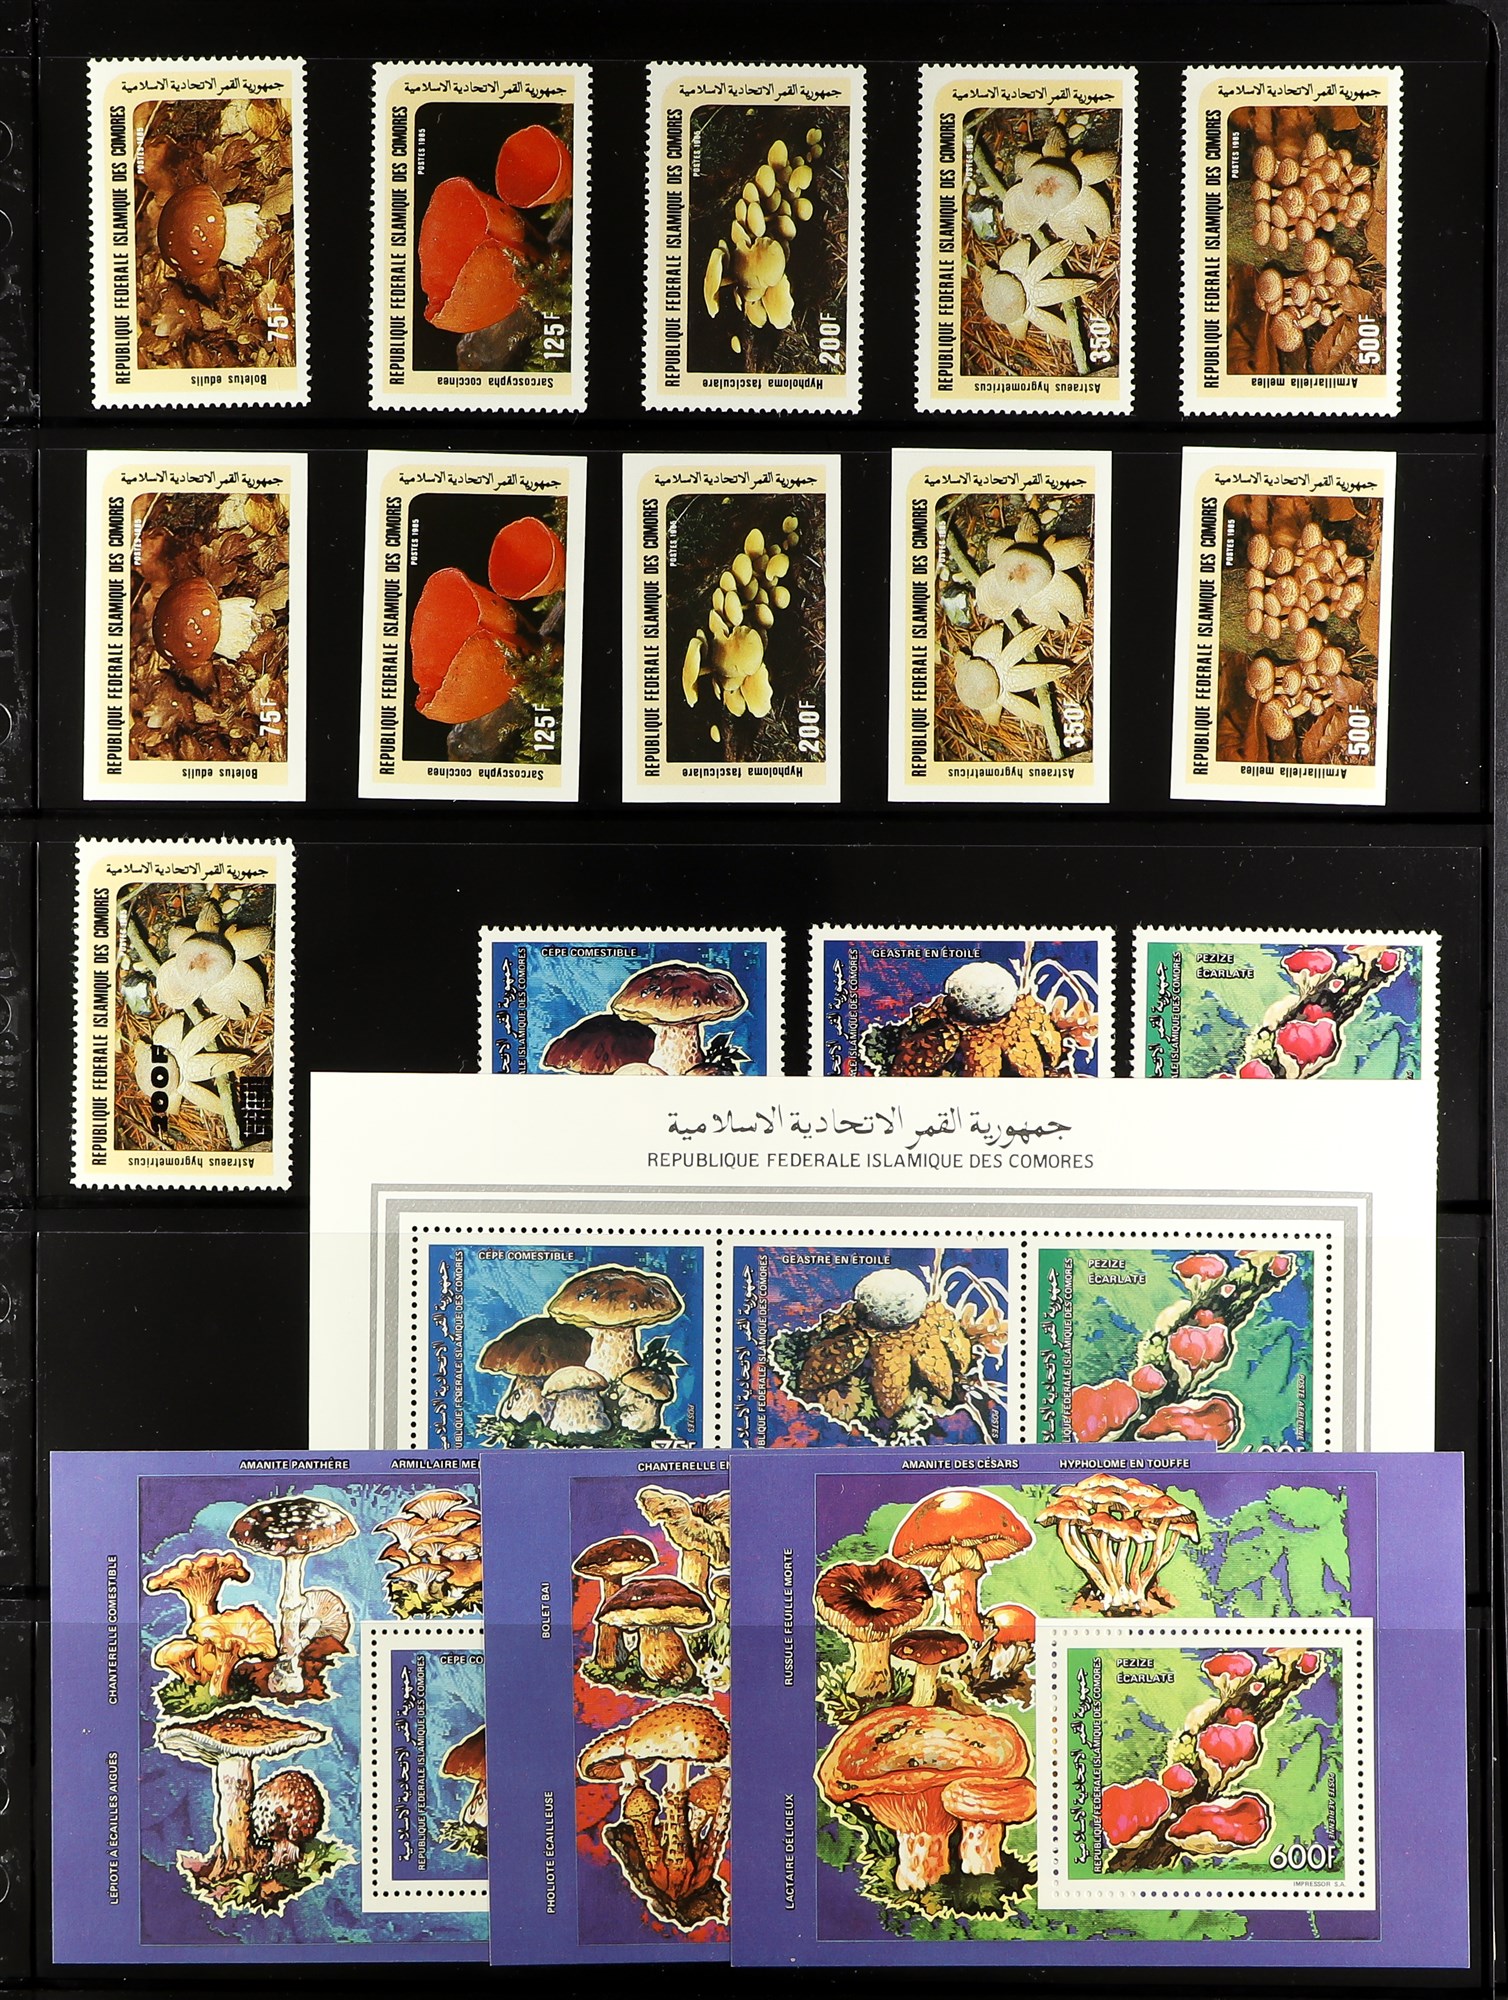 TOPICALS MUSHROOMS (FUNGI) OF COMORES 1985-2010 NEVER HINGED MINT collection, with imperf and perf